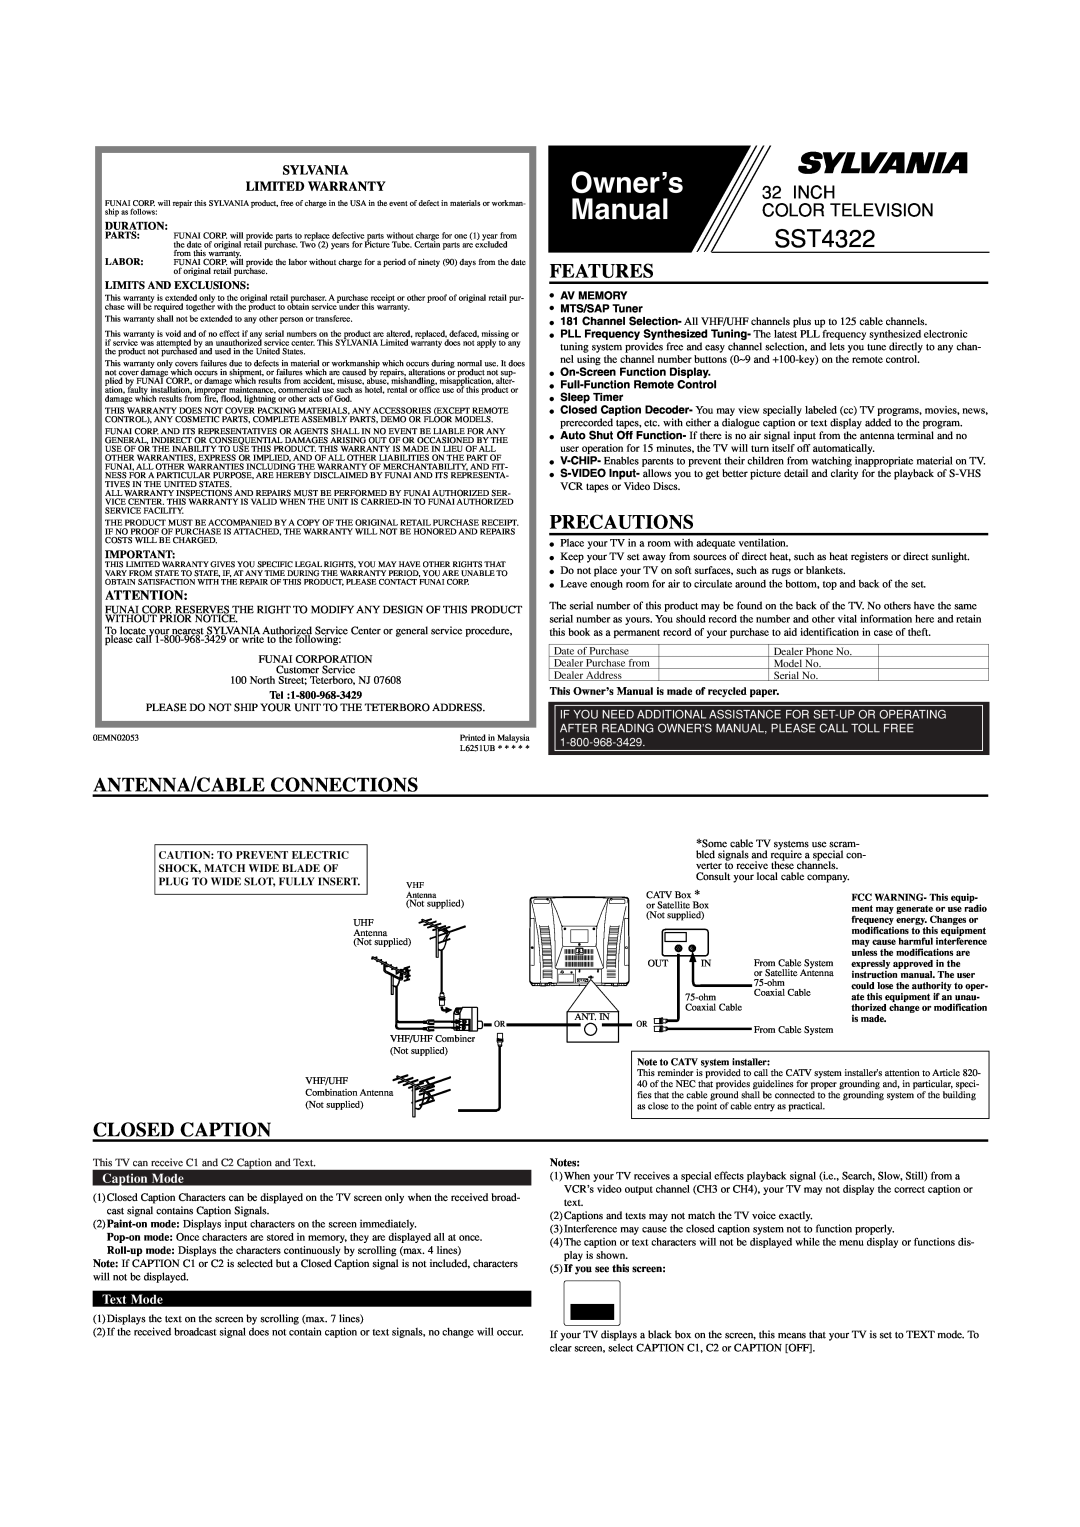 Sylvania SST4322 owner manual Features, Precautions, Antenna/Cable Connections, Closed Caption, Sylvania Limited Warranty 